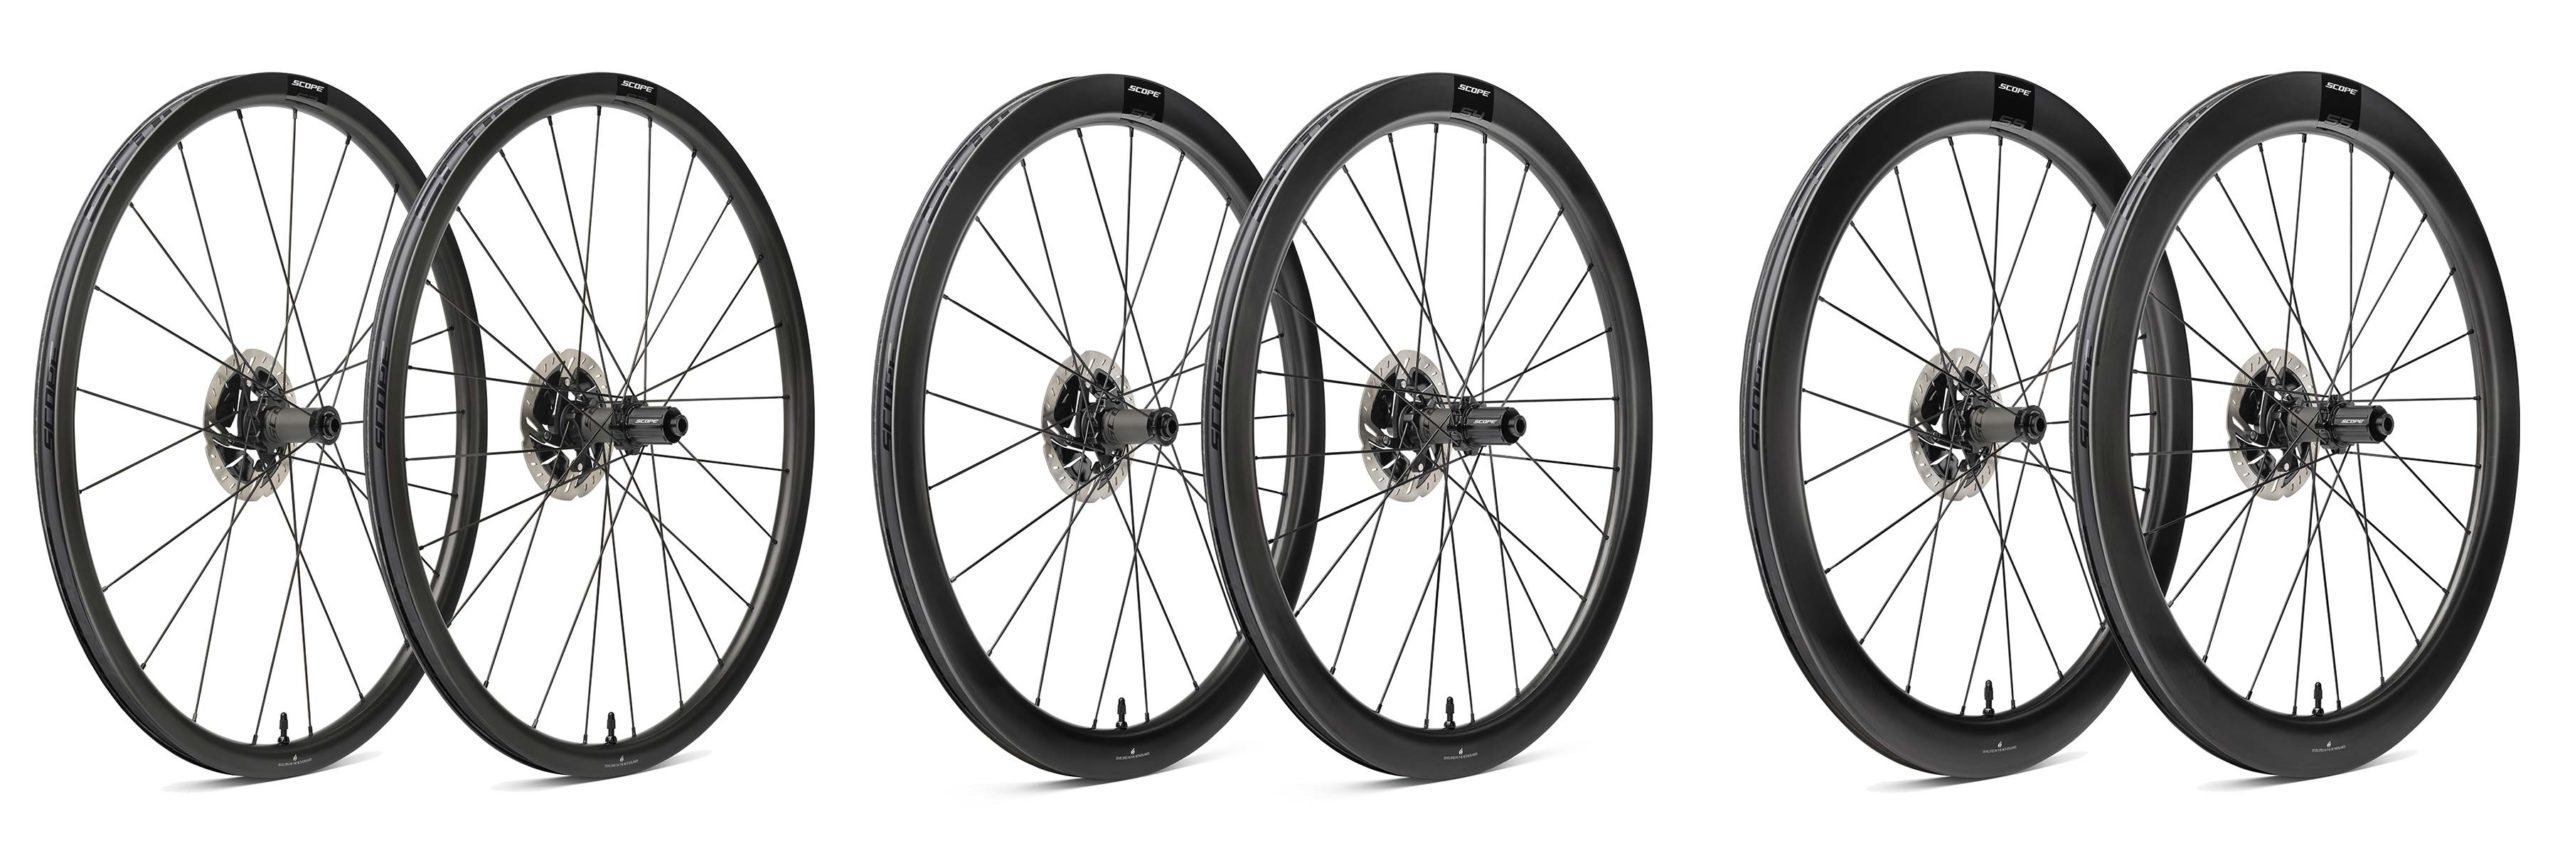 Scope Sport S3 S4 S5 affordable carbon tubeless road wheels, 998€ for disc brakes